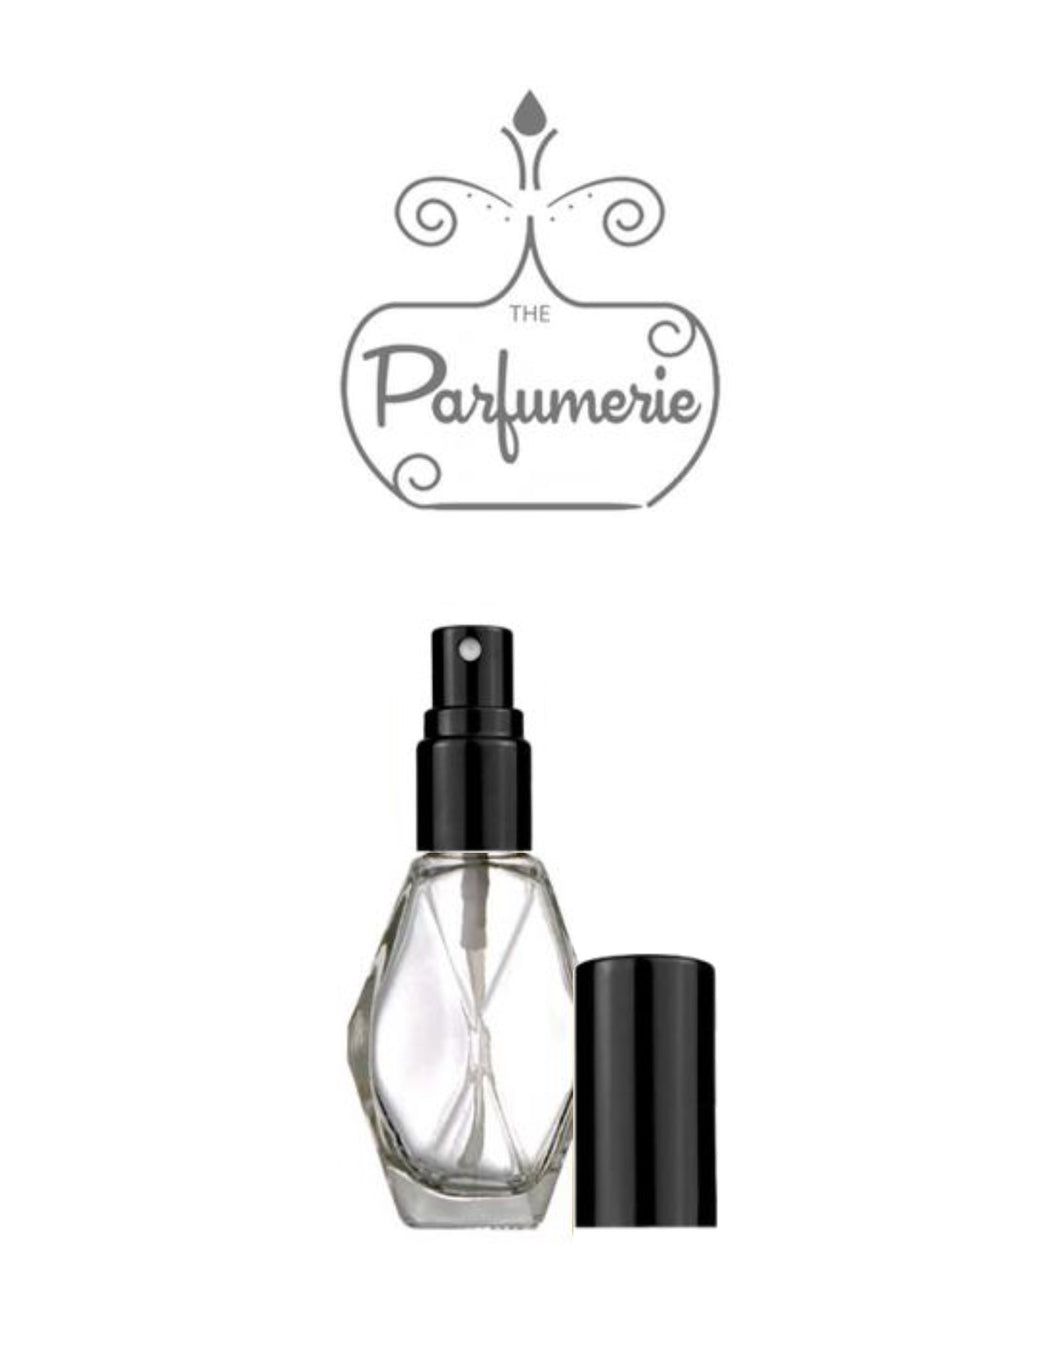 Diamond Glass Perfume Atomizer Bottle with a black spray top and over cap. Sizes available are 1/2 oz., 1 oz. and 2 oz.